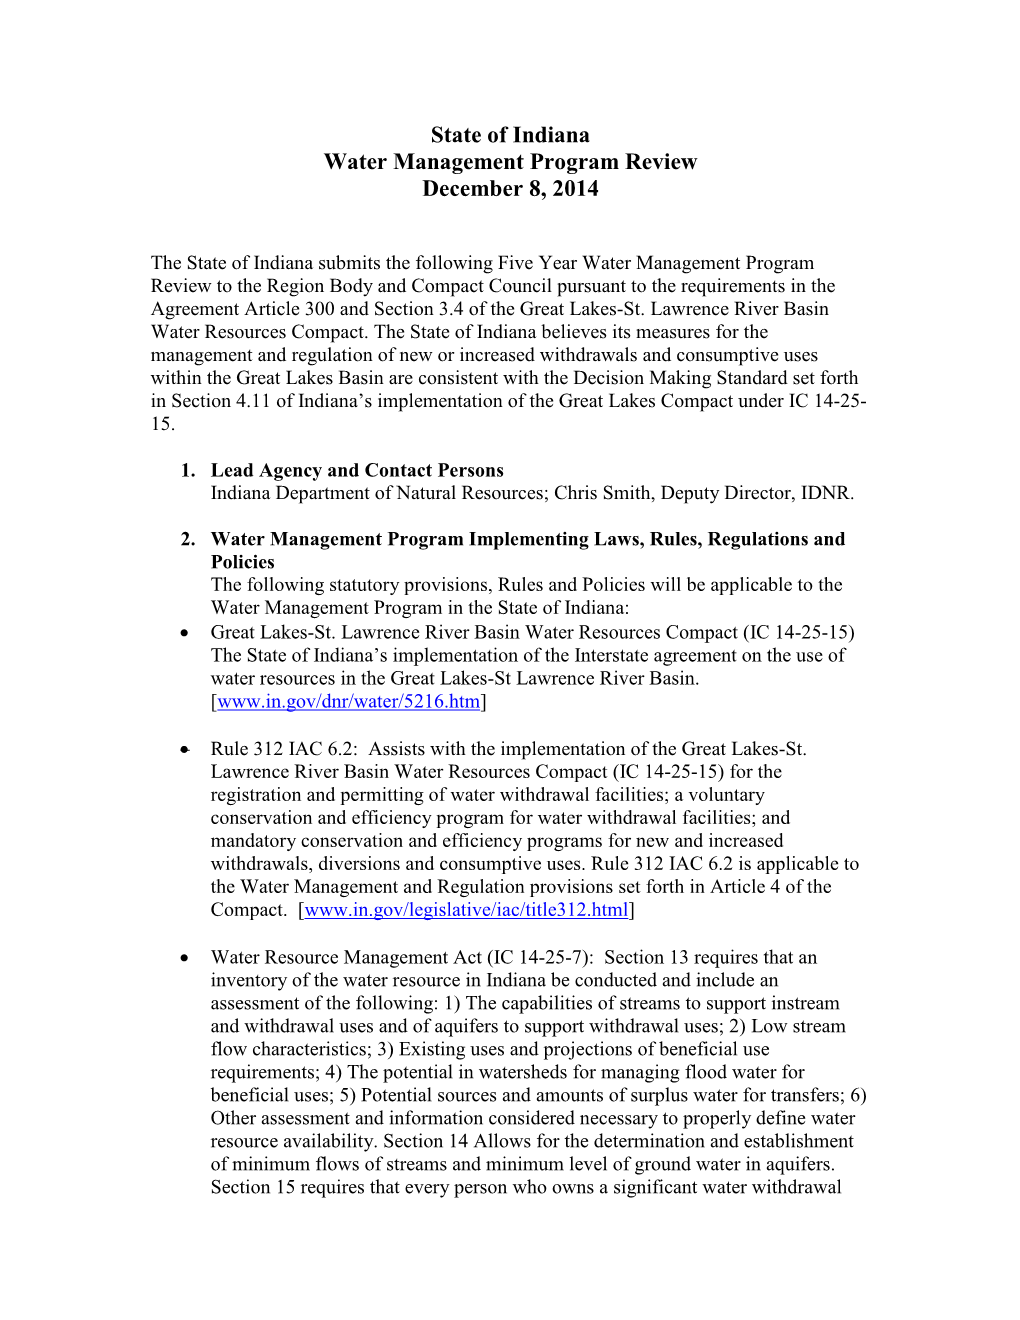 Indiana Water Management Program Review December 8, 2014